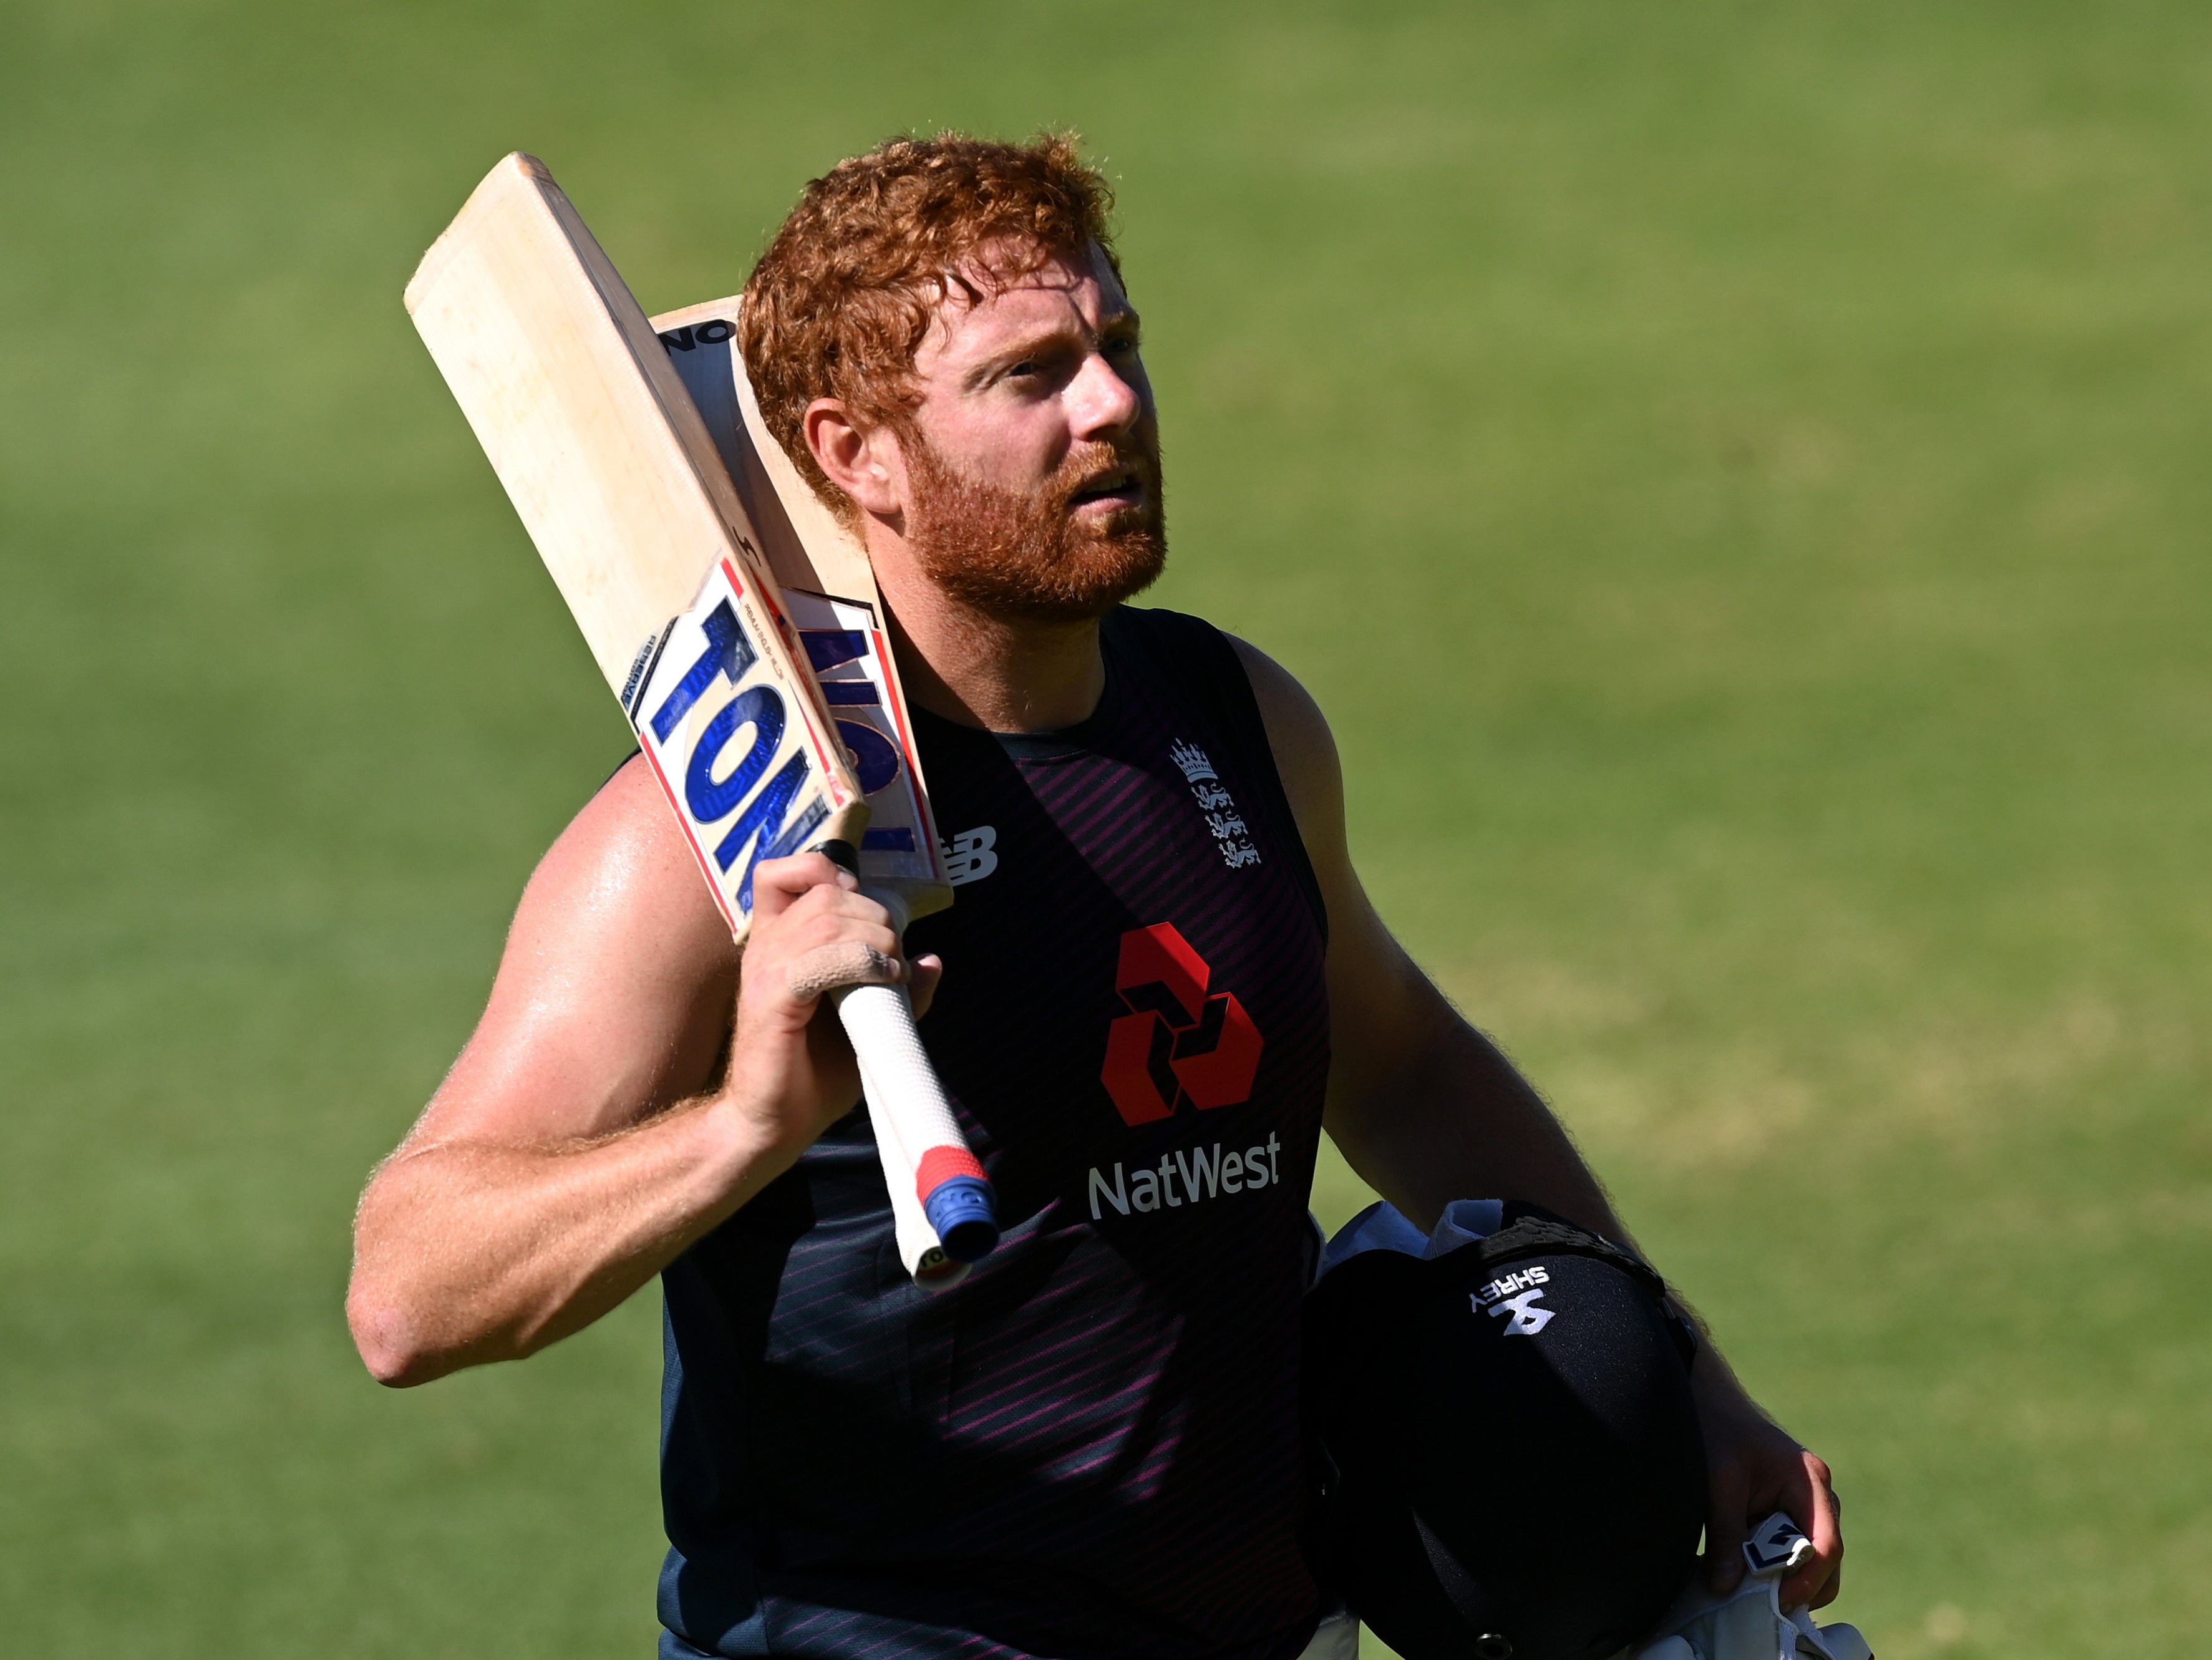 Jonny Bairstow impressed for England in their recent T20 series against South Africa